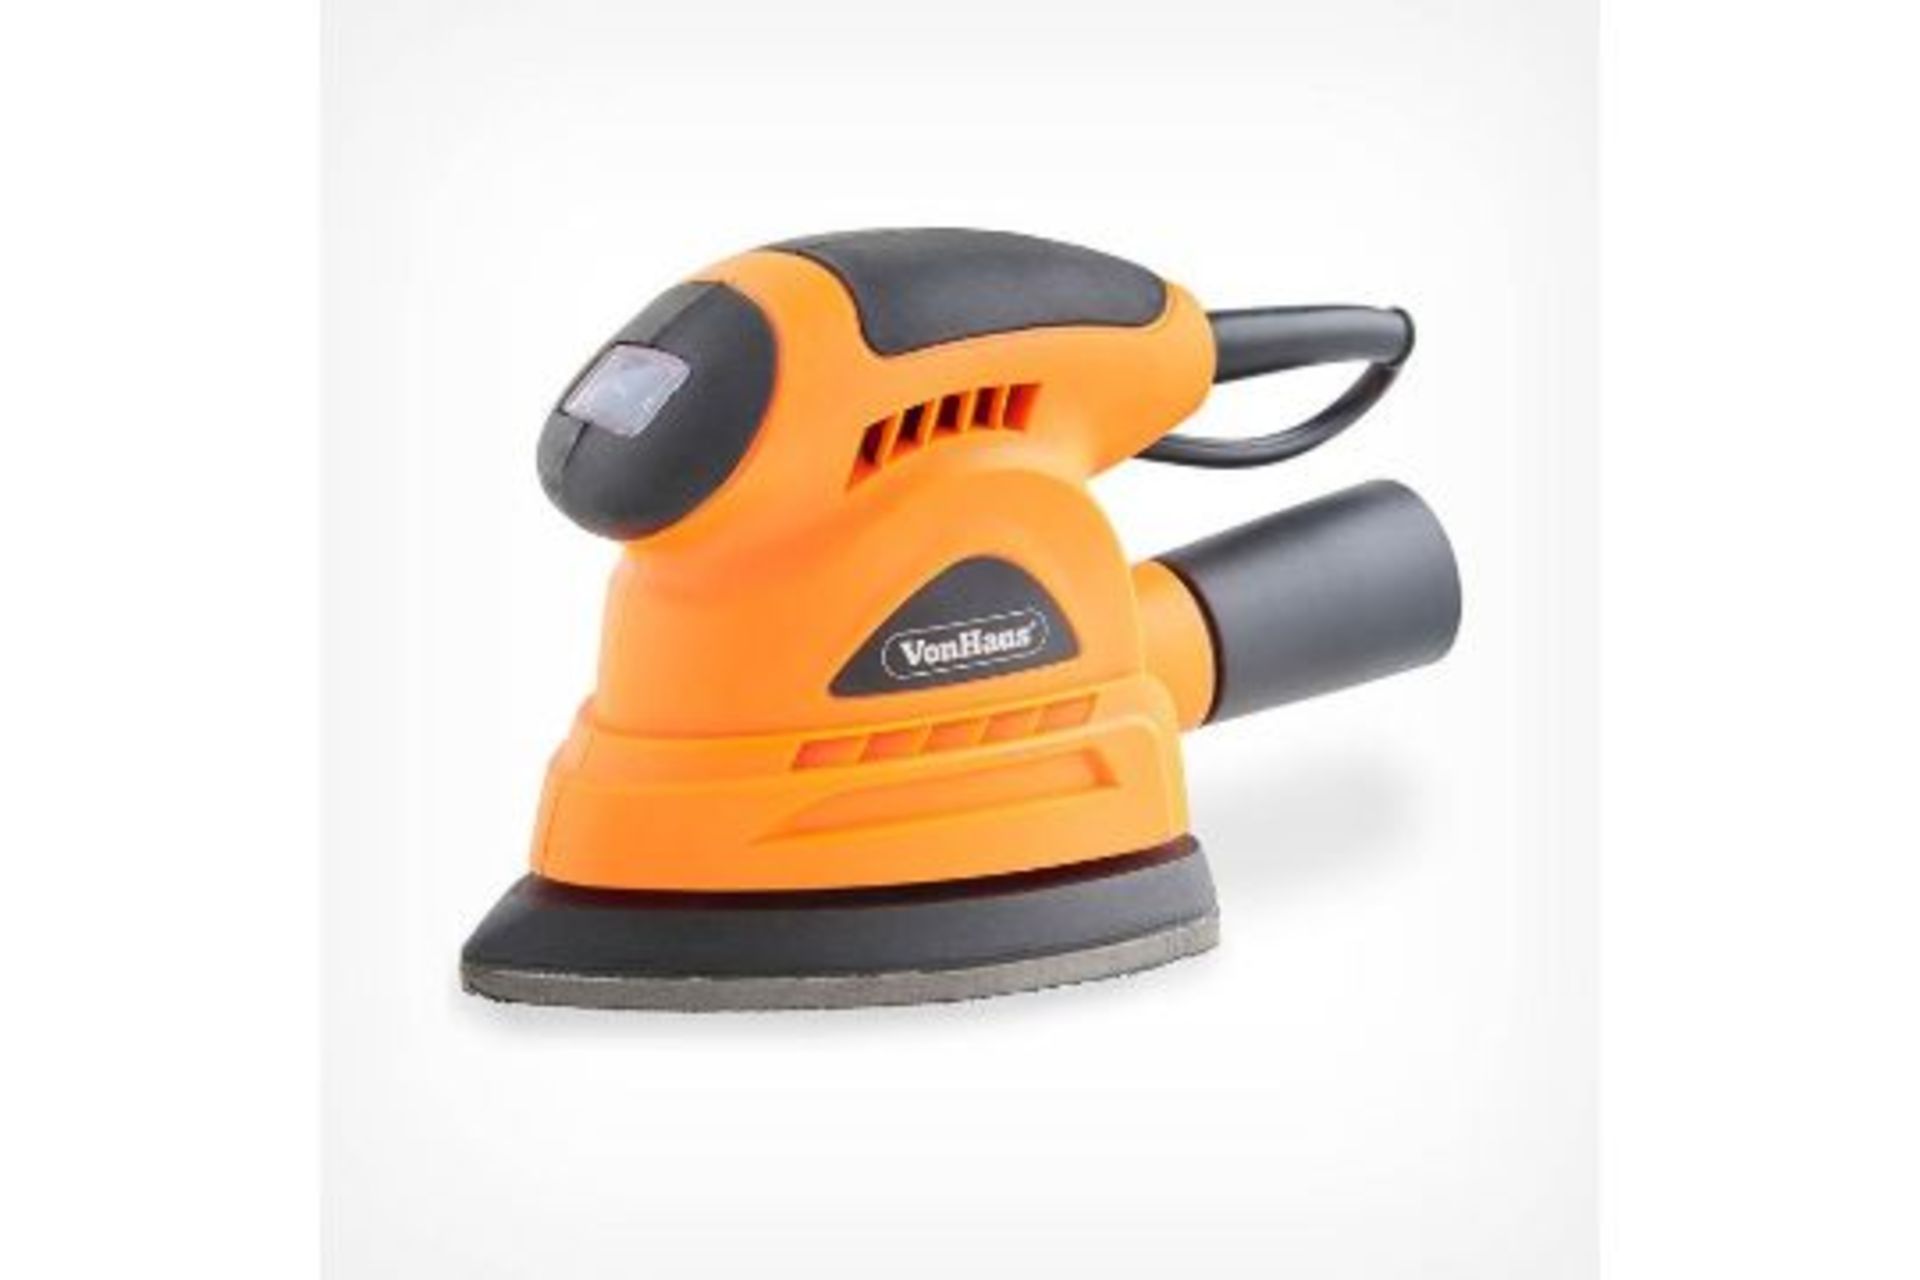 130W Detail Sander. - PW. The sander is designed with a hook and loop rubber pad, which grips the